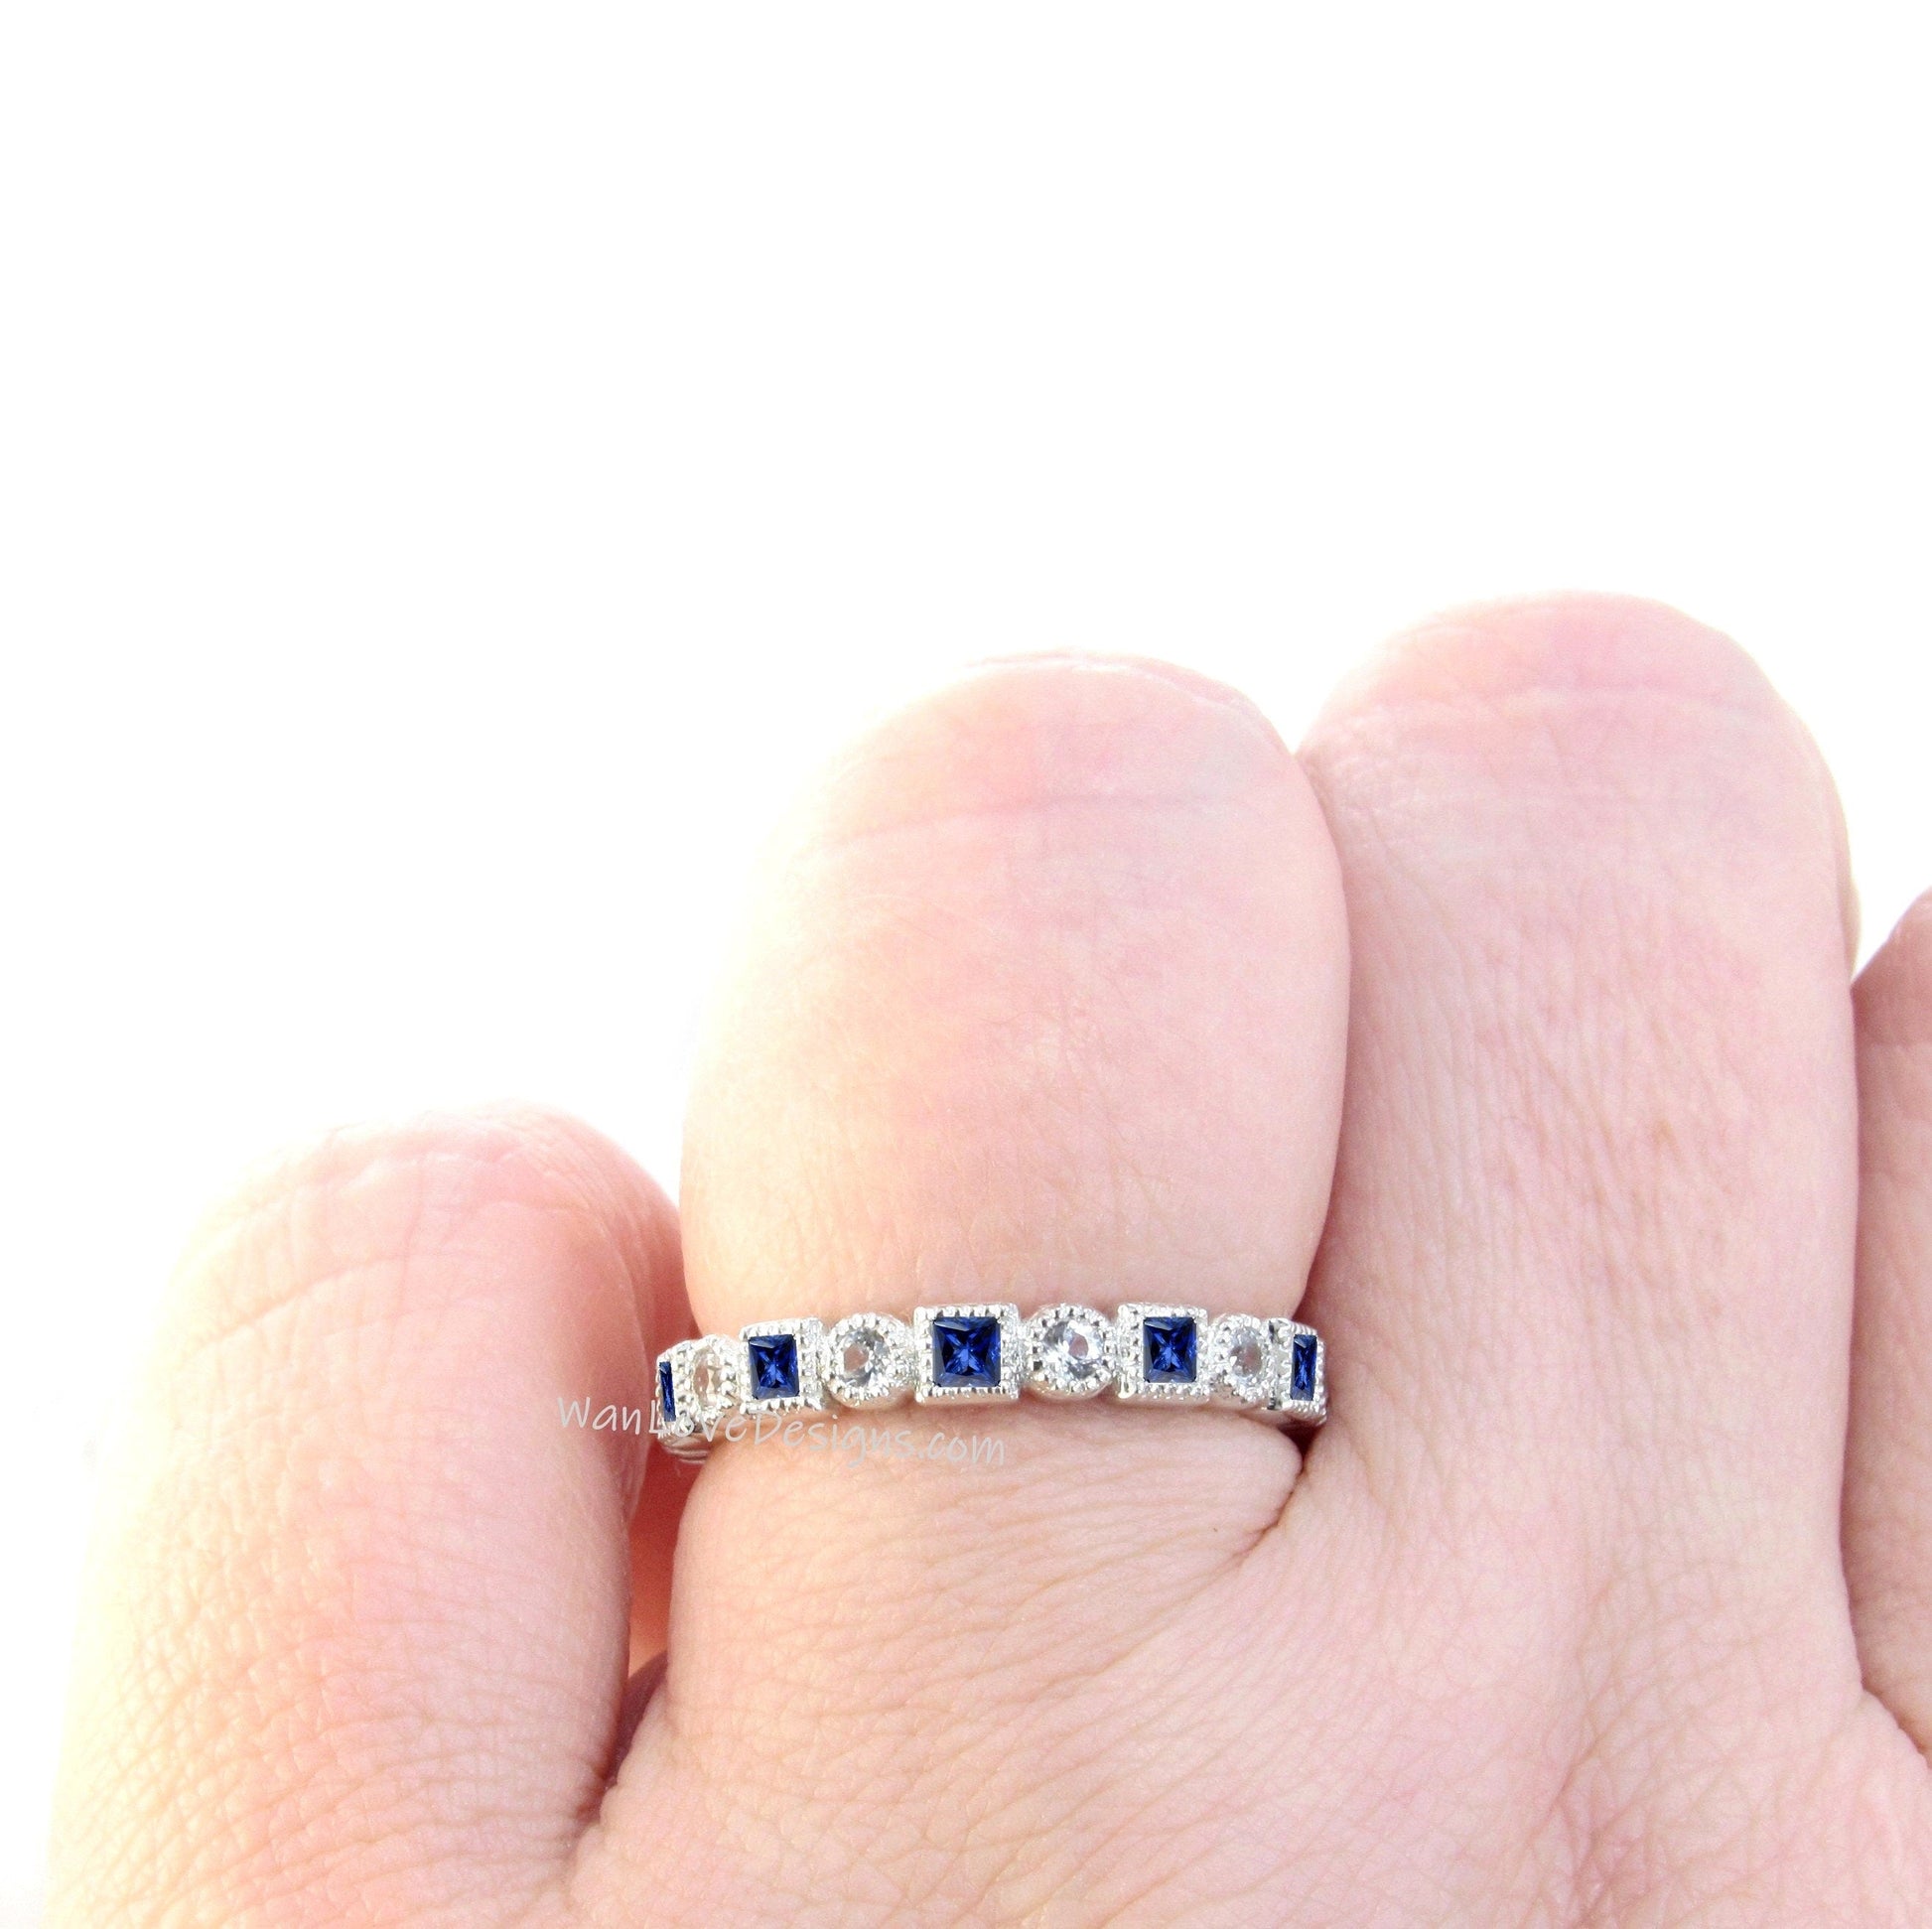 Round Baguette Blue Sapphire Diamond WITH ot WITHOUT Milgrain Halfway Half Eternity Stacking Ring, 14kt 18k Rose Gold Band, Bridal Jewelry Wan Love Designs